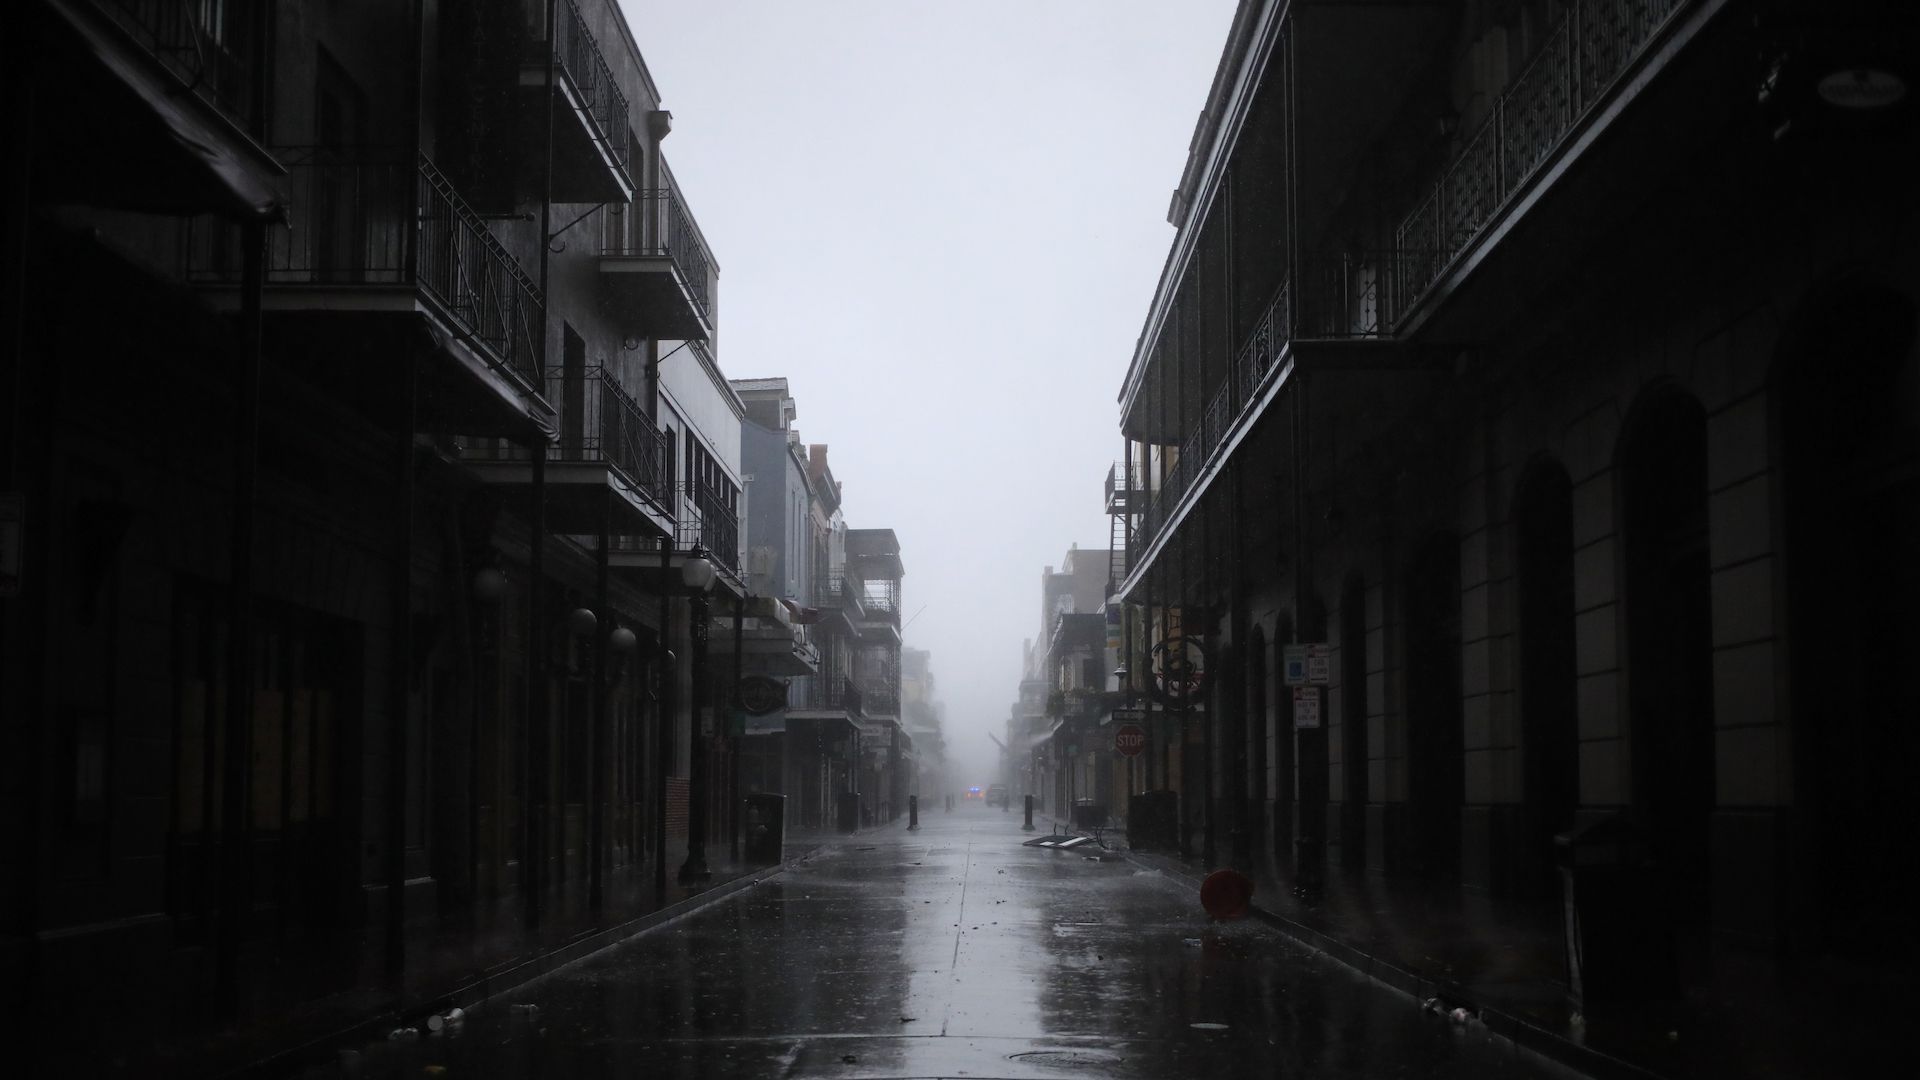 Bourbon Street during a citywide power outage caused by Hurricane Ida in New Orleans on Sunday, Aug. 29, 2021.